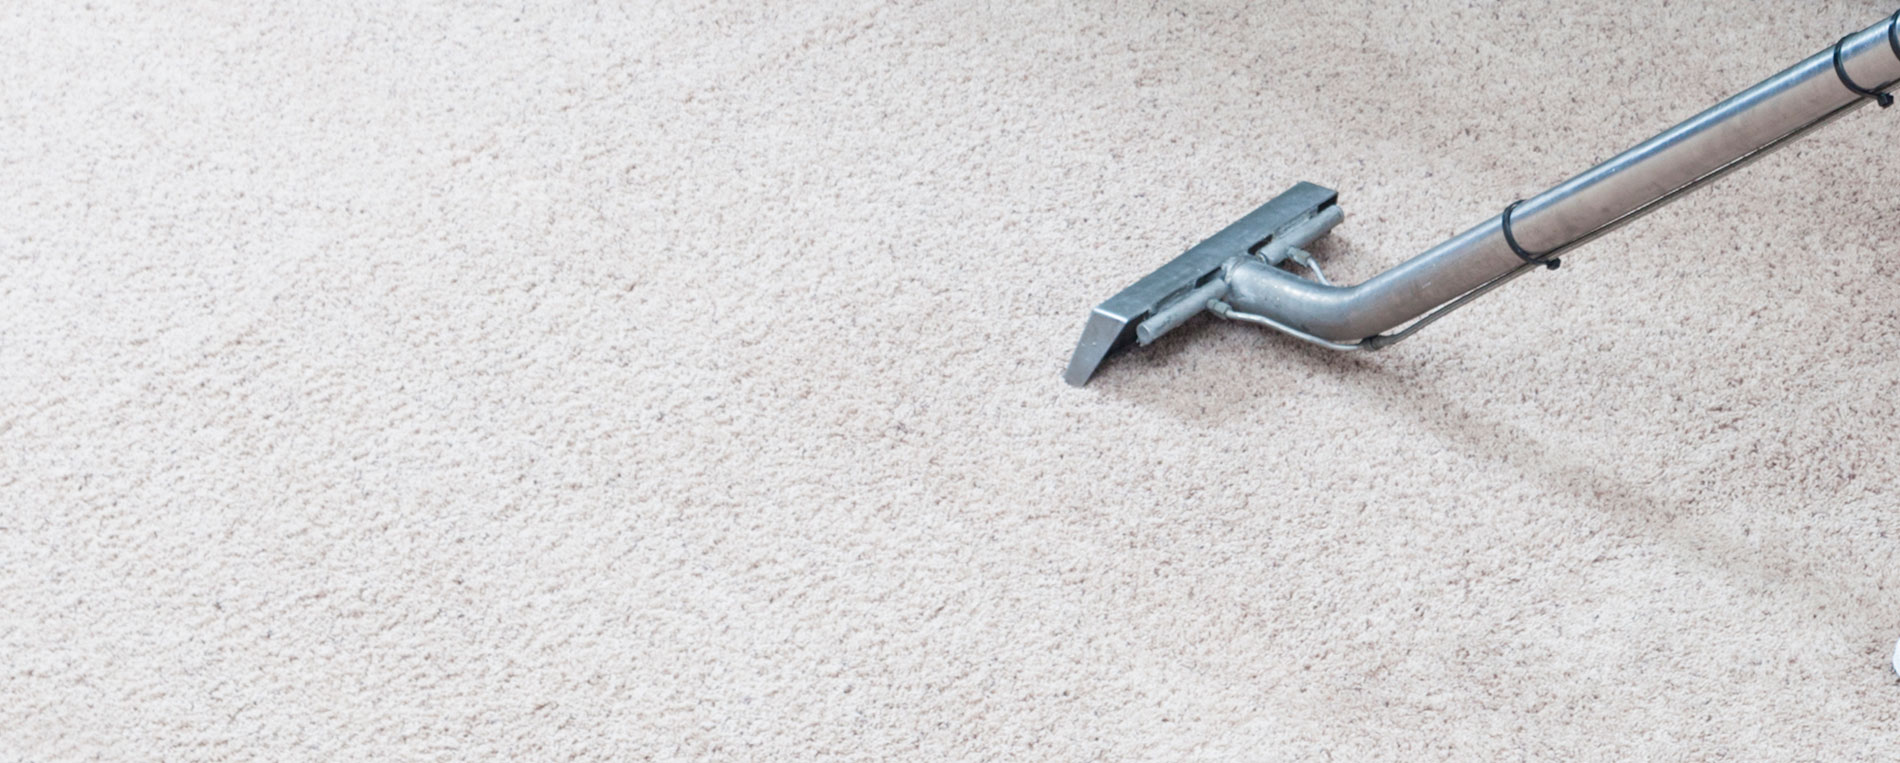 Steam Cleaning Carpet In Burbank